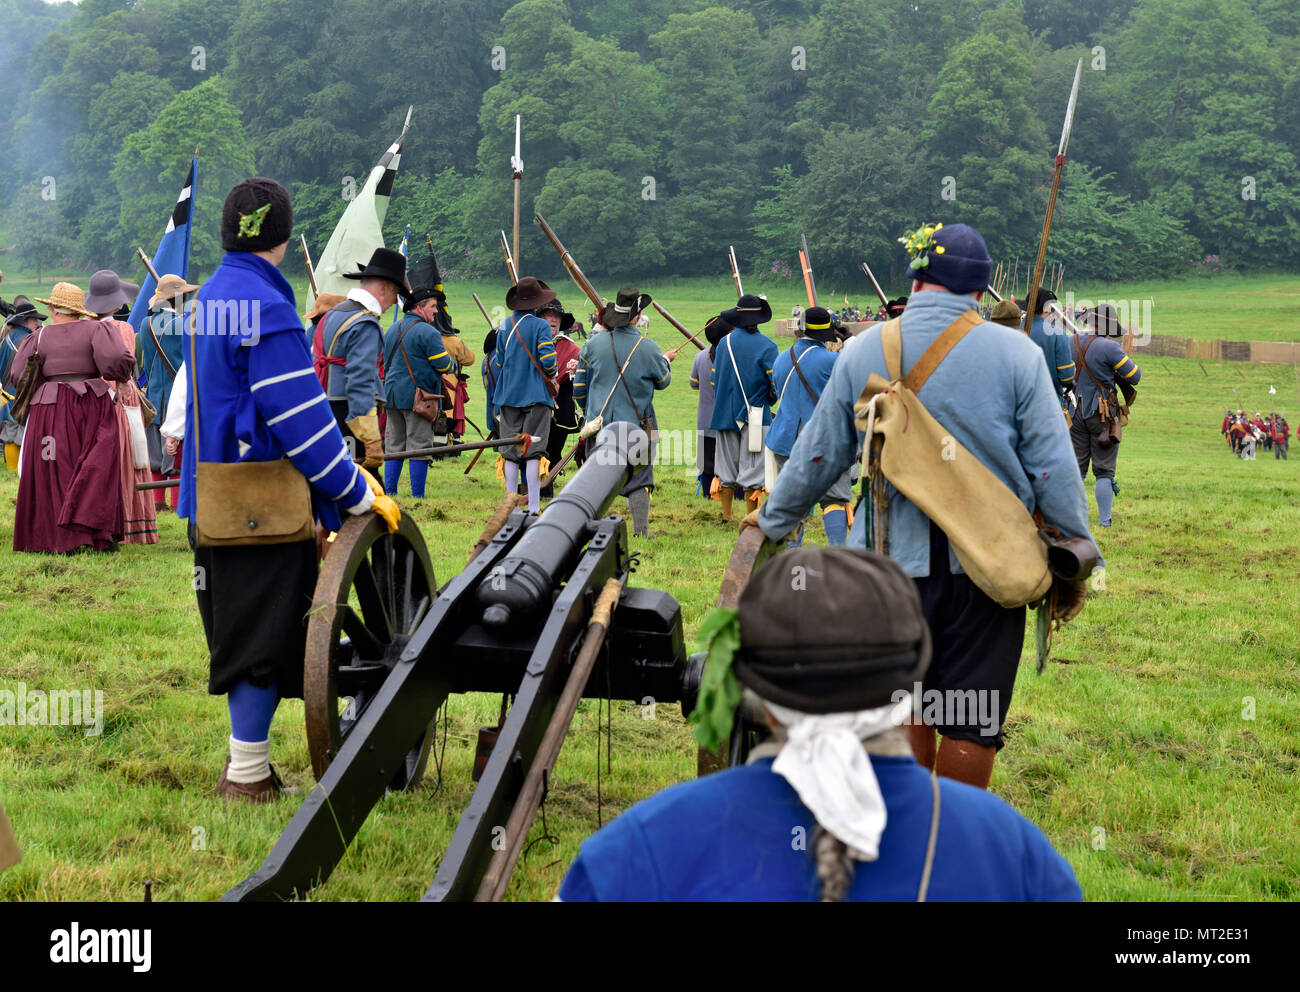 Bristol, UK, 27 May, 2018. British civil war, The Siege of Bristol 375th Anniversary of battles (1645) between Parliamentarians ('Roundheads') and Royalists ('Cavaliers') re-enacted by members of the Sealed Knot in Bristol Ashton Court afternoons of 27 and 28 May 2018, England. Over 2000 re-enactors Credit: Charles Stirling/Alamy Live News Stock Photo